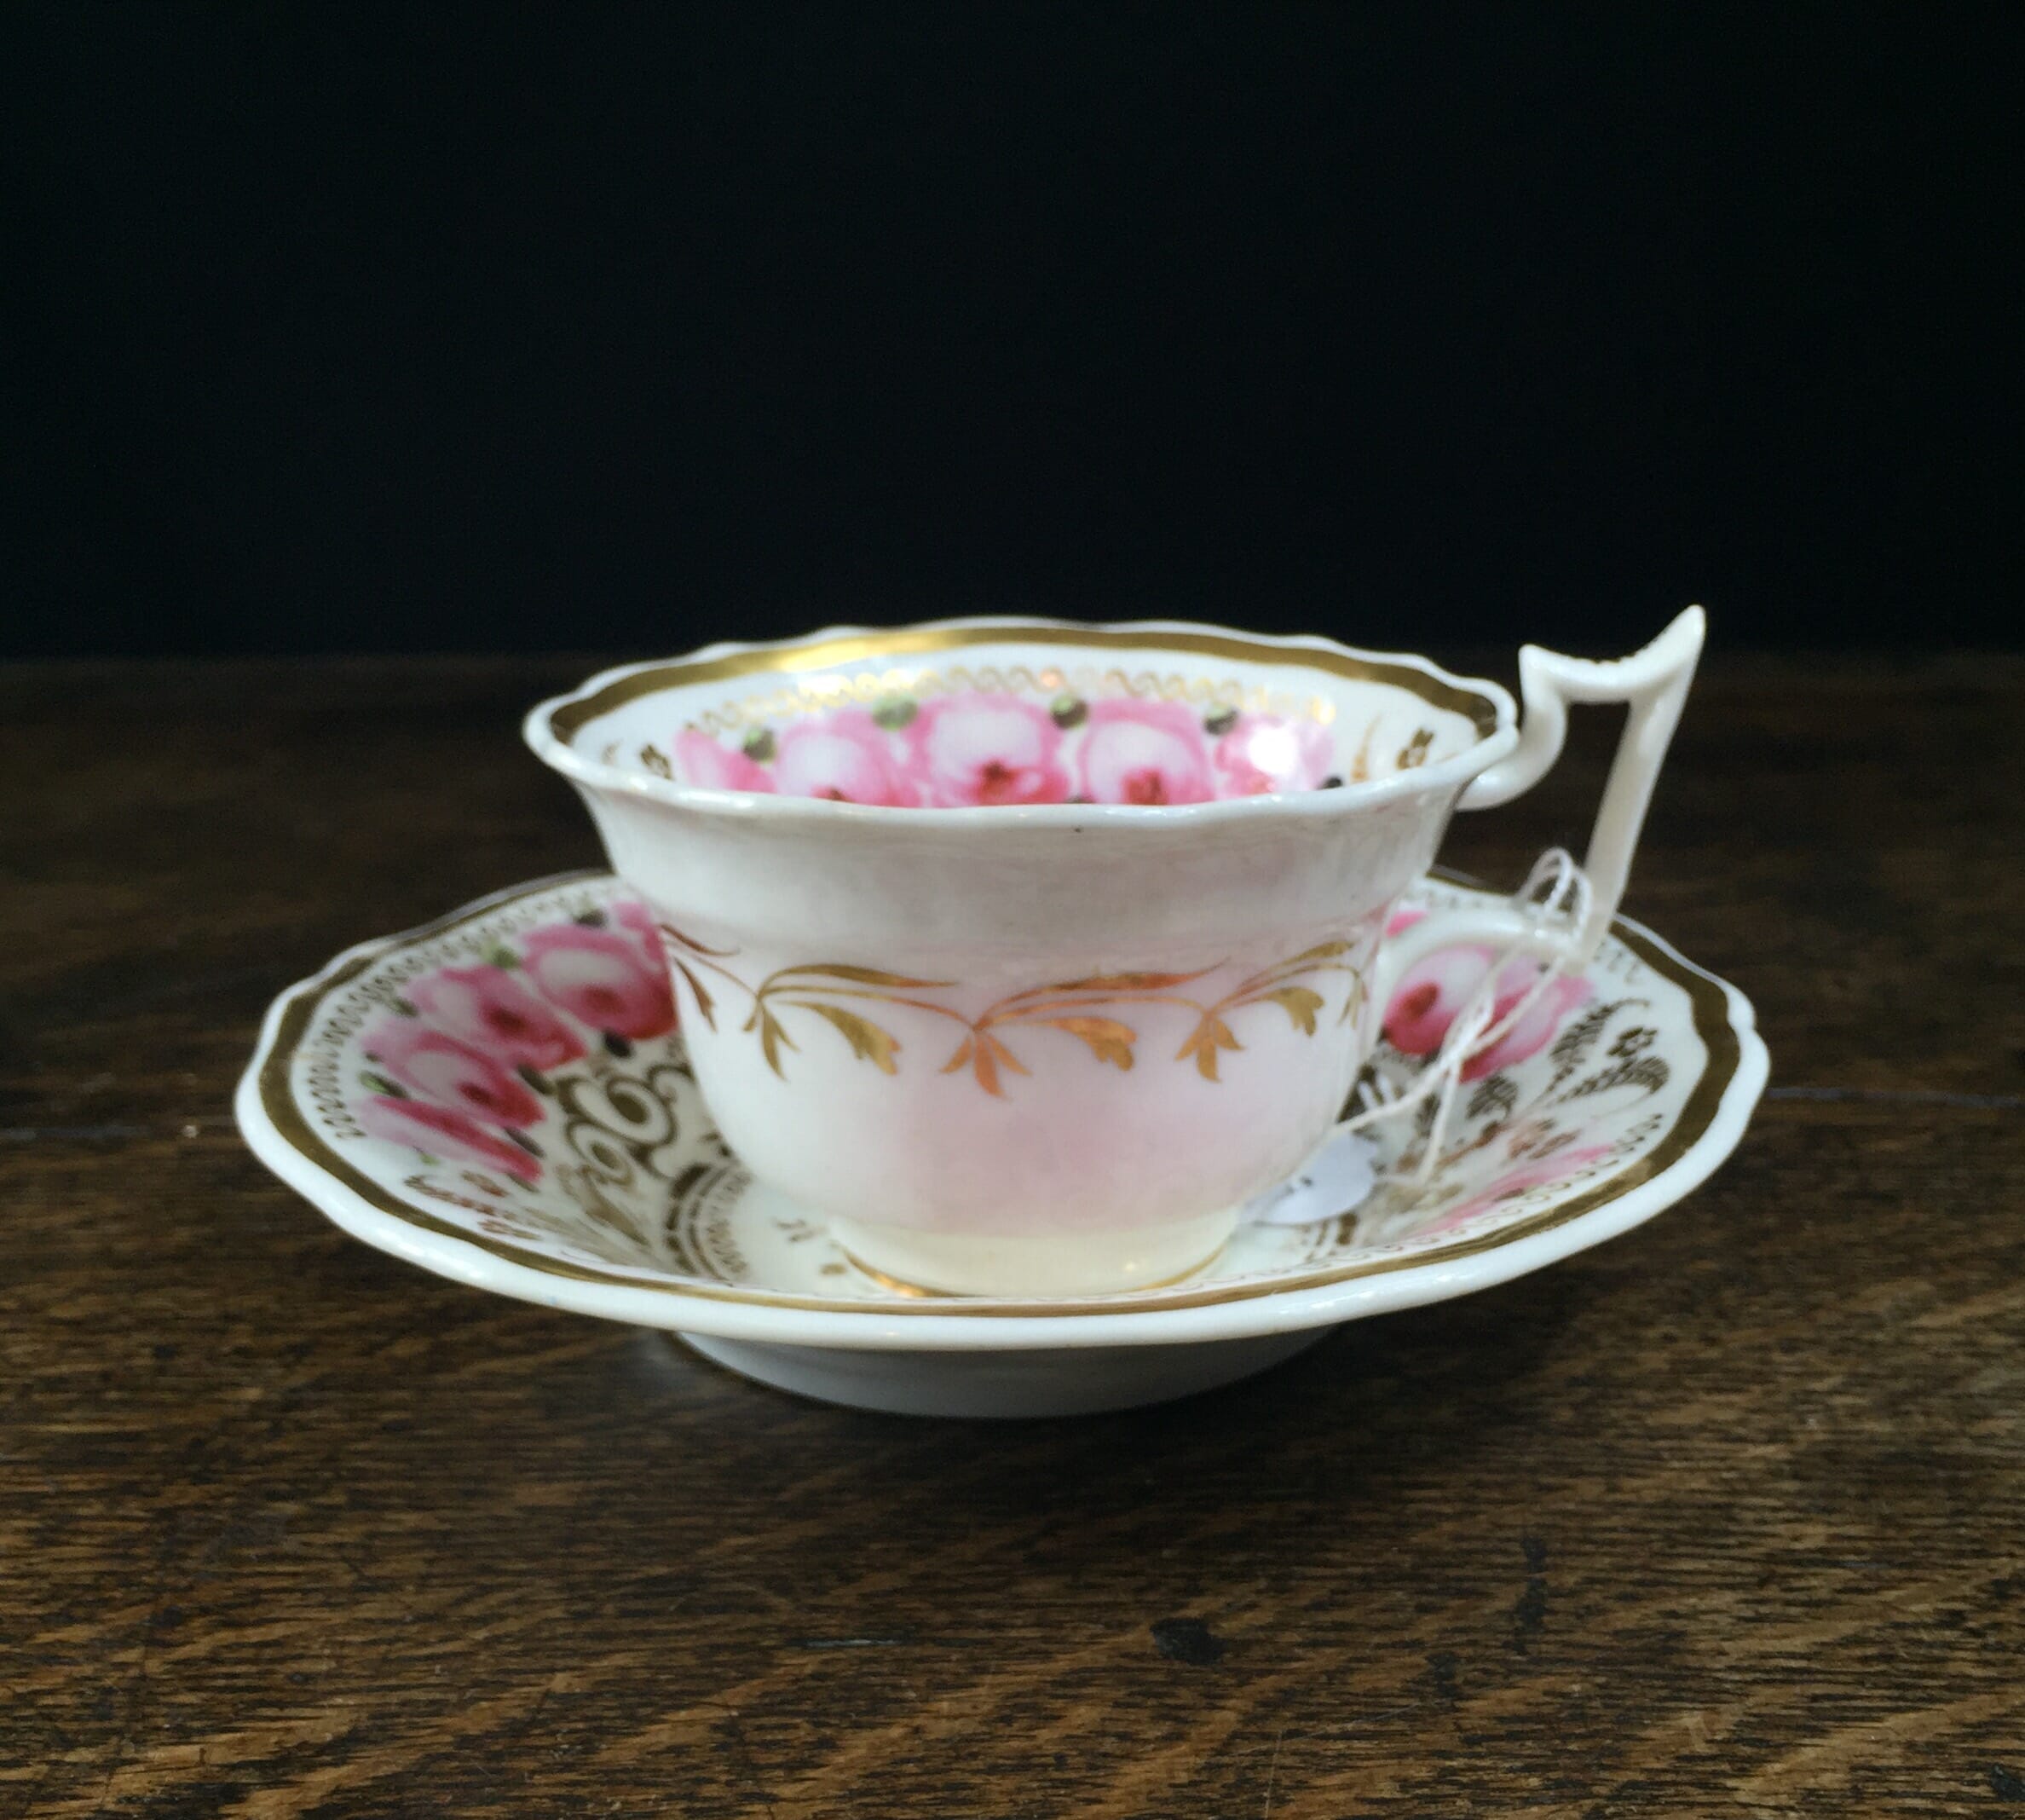 New Hall cup & saucer with pink roses, c. 1830-0